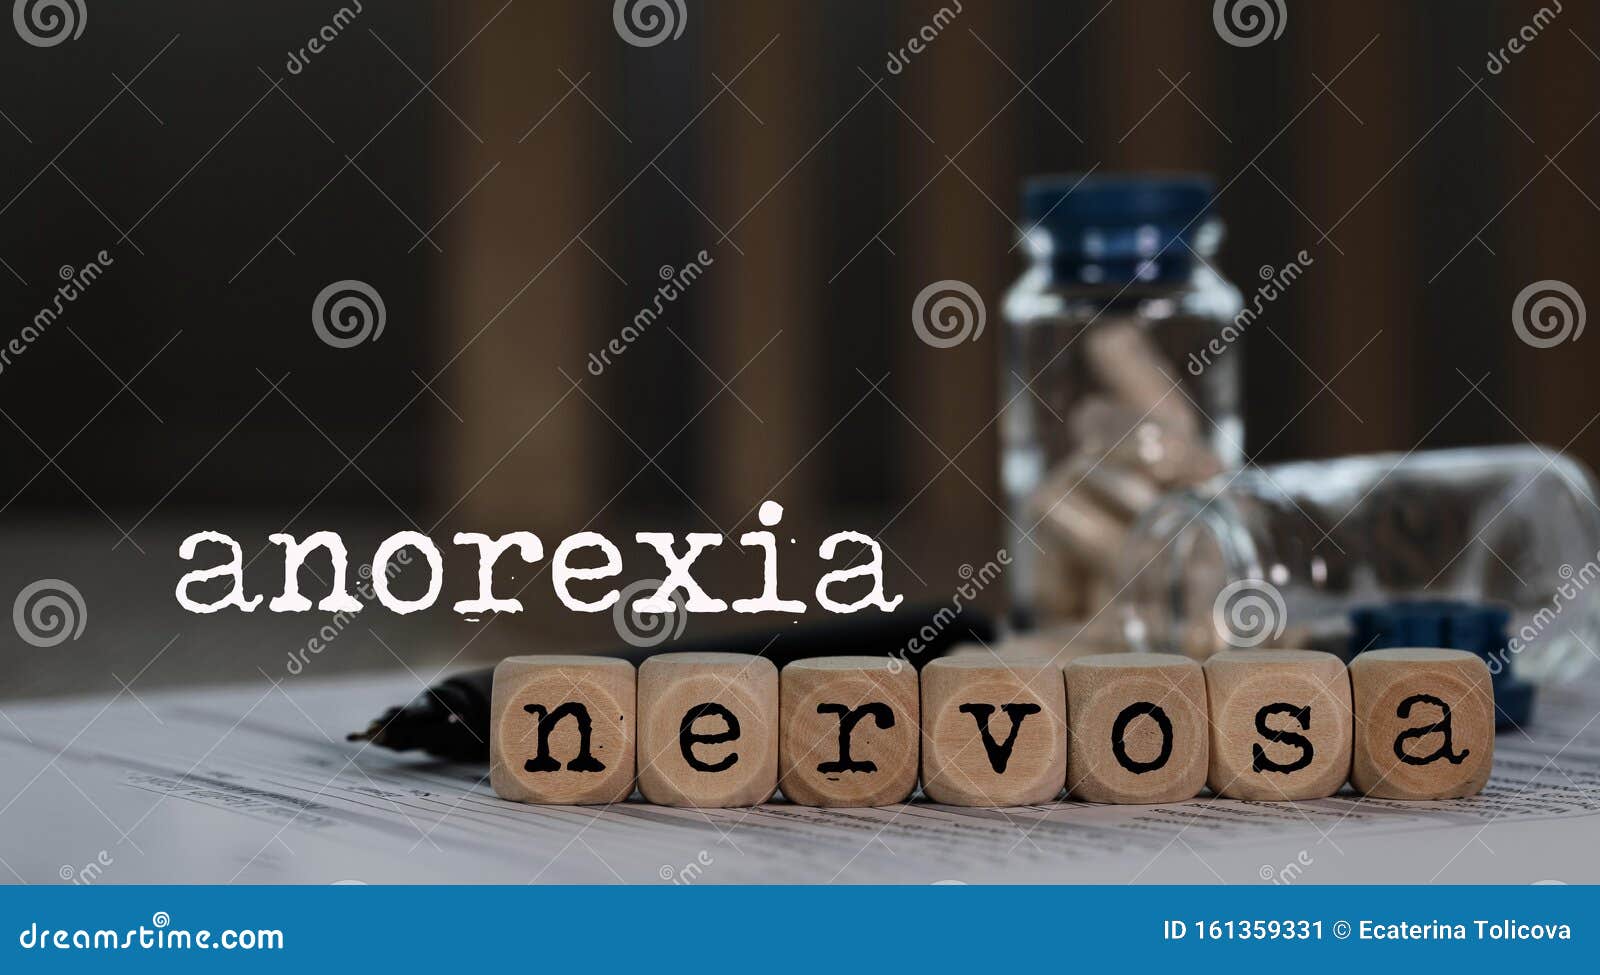 word anorexia nervosa composed of wooden dices